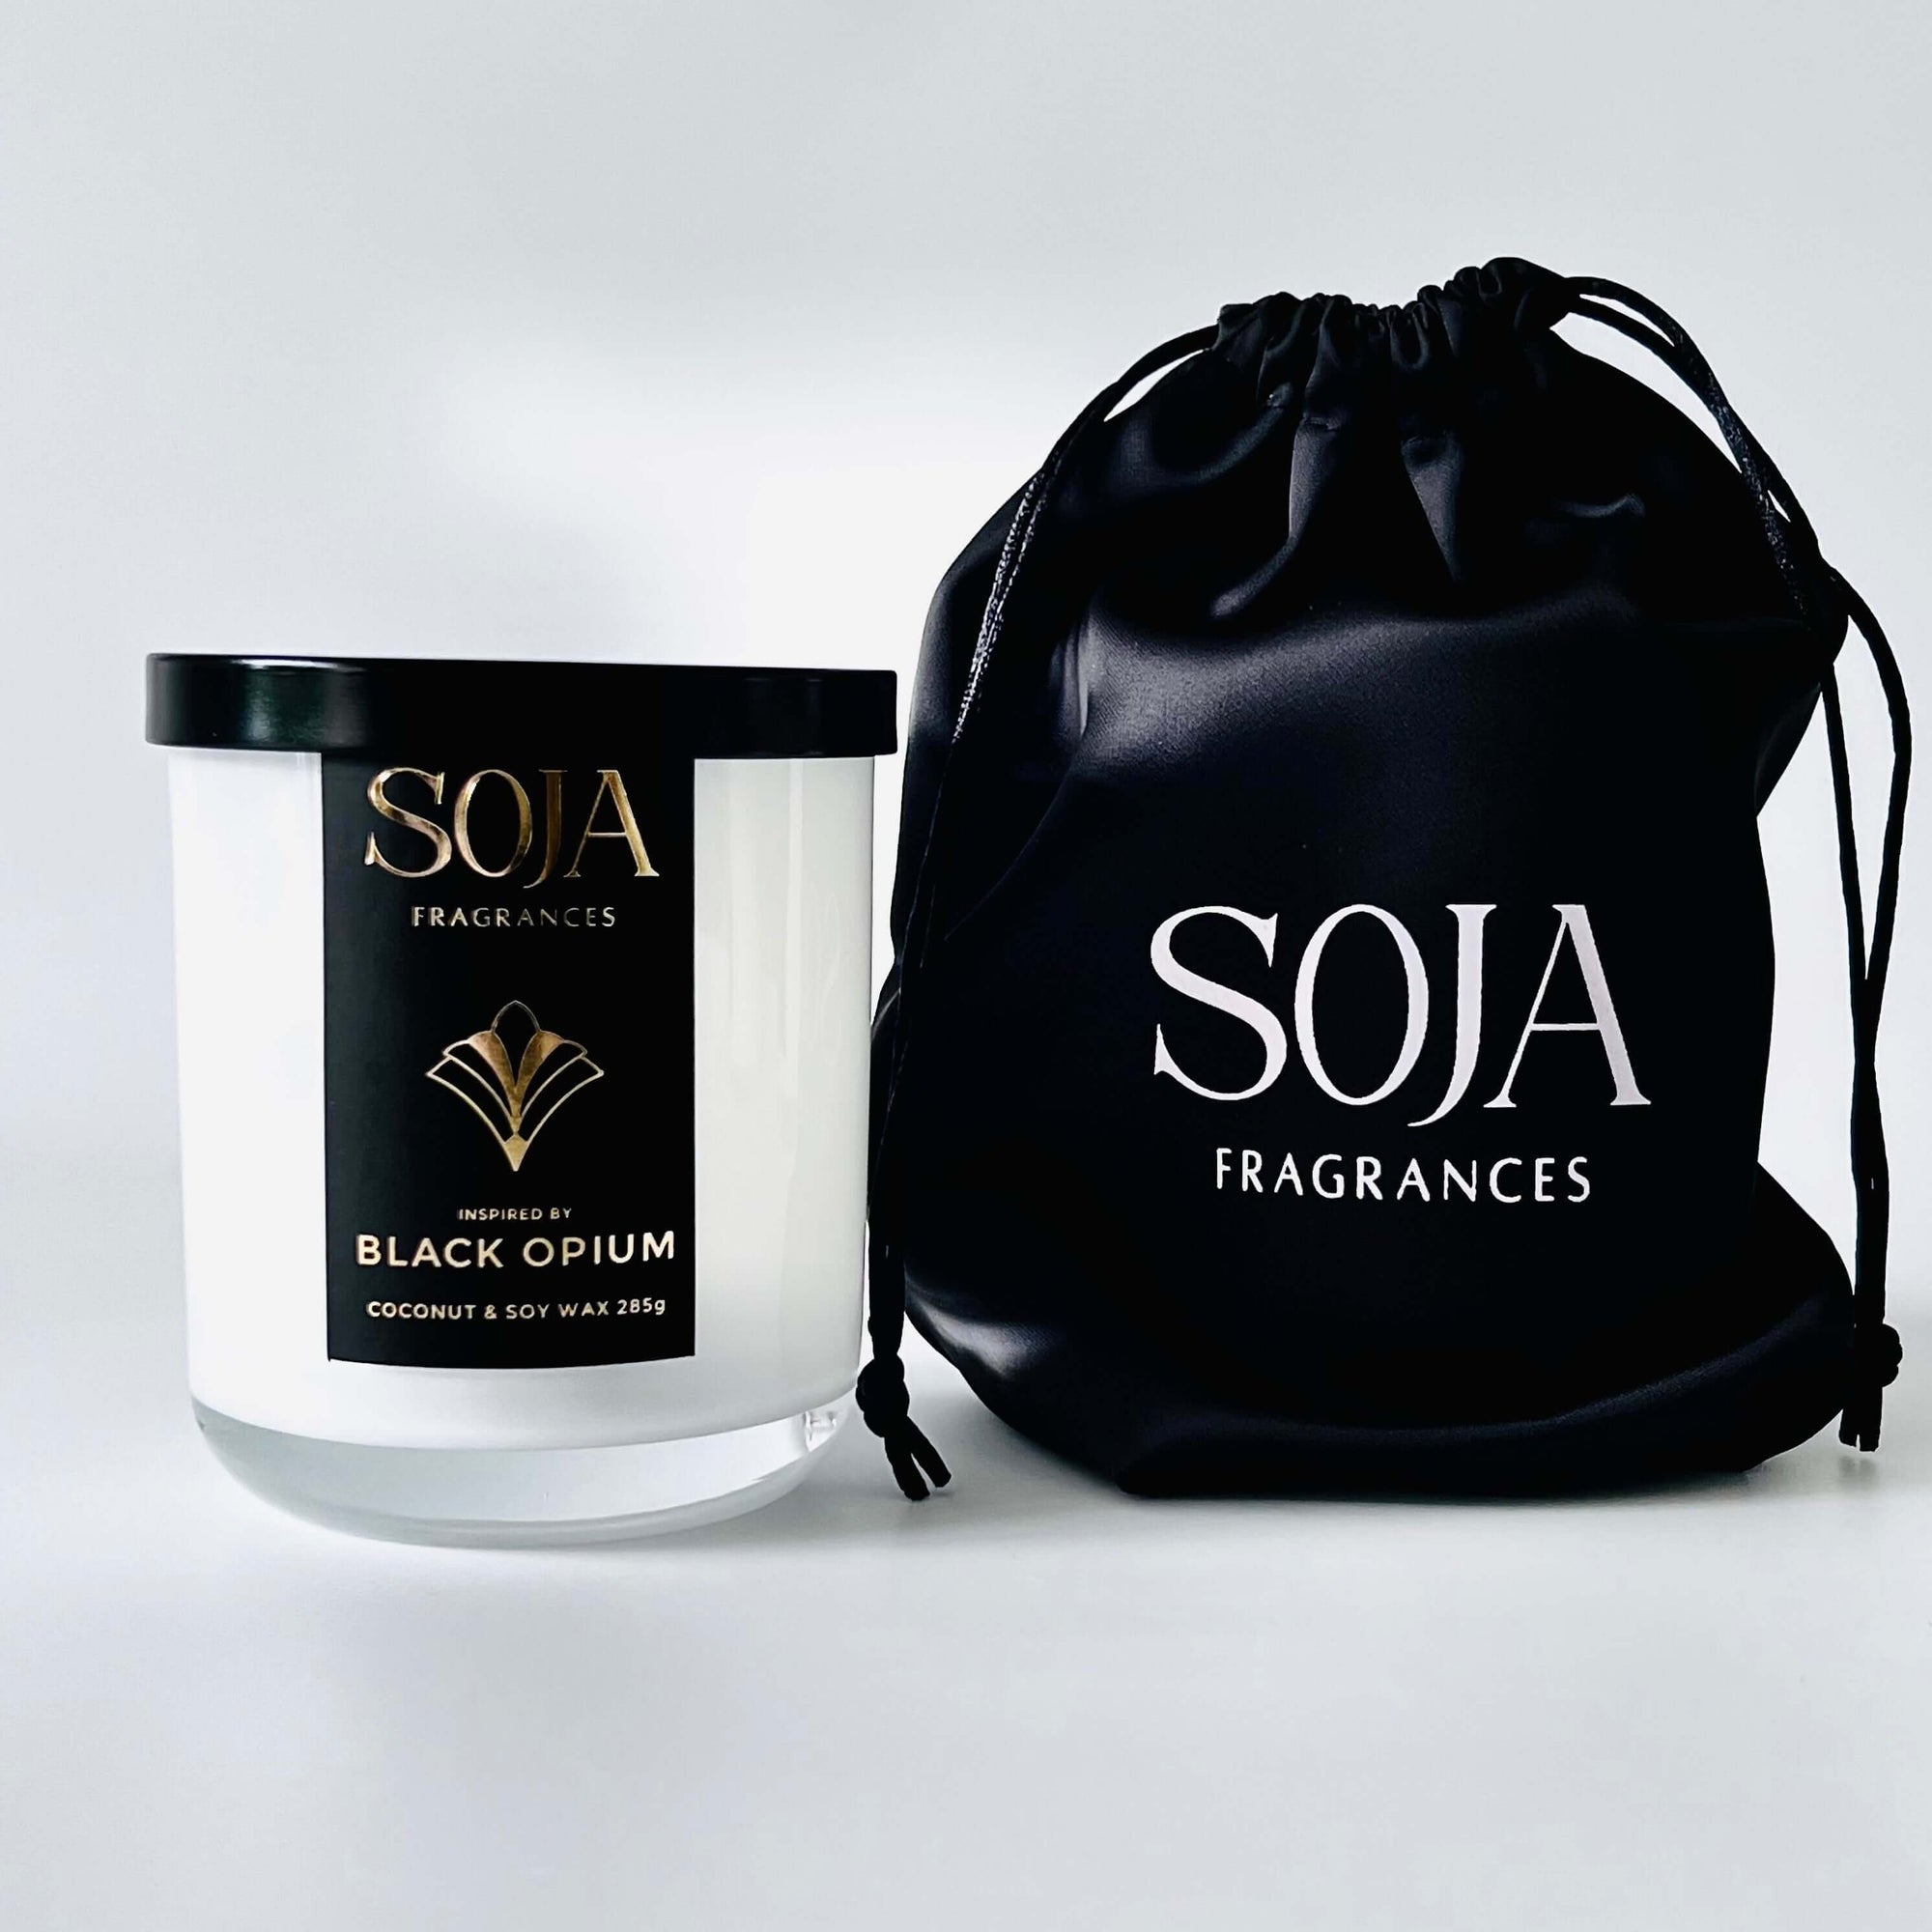 Black opium perfumed candle with black satin product bag